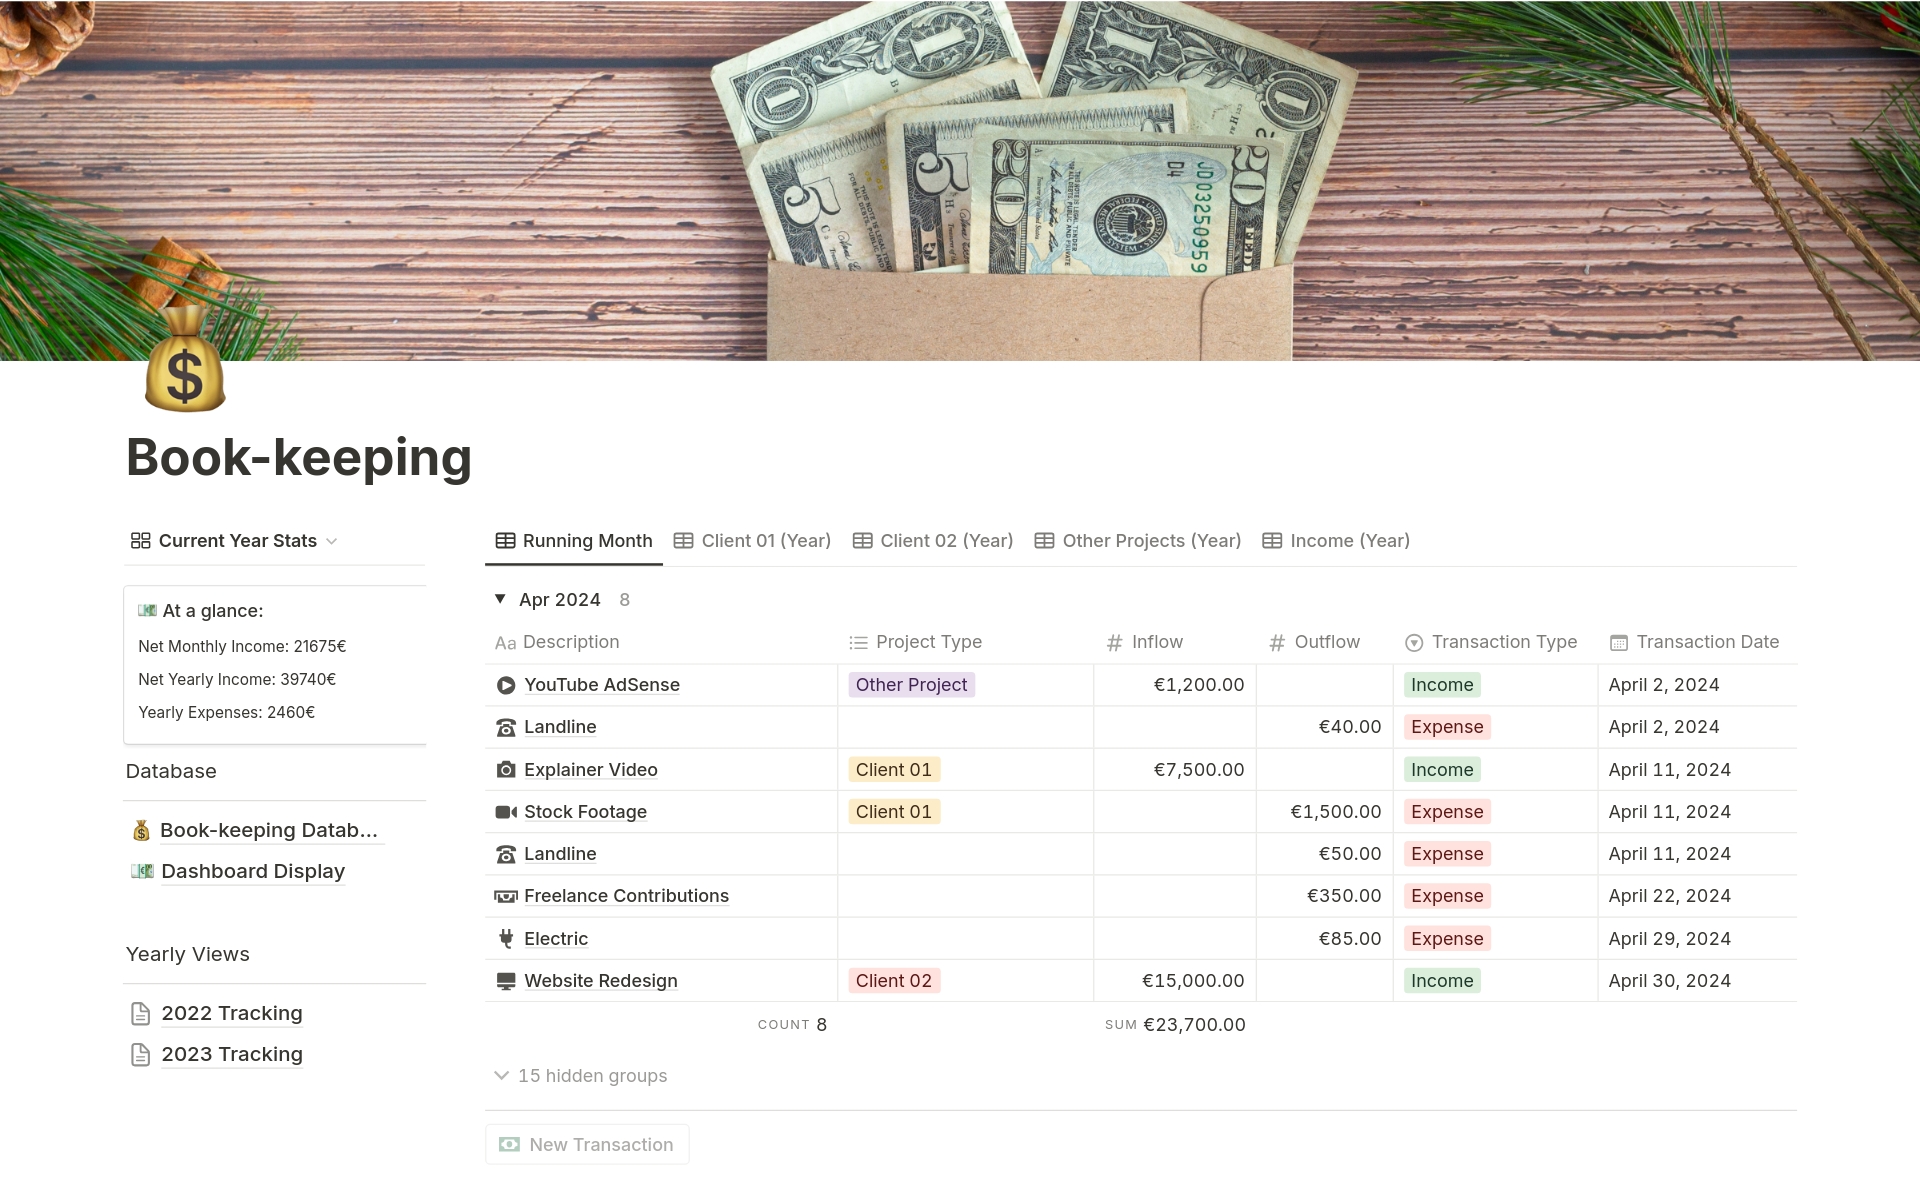 Track your income and expenses with this easy to use template. Quickly see how you're doing with the handy widget view, or dive deeper through dedicated filtered views. The template also comes with a short video explaining how everything works! 